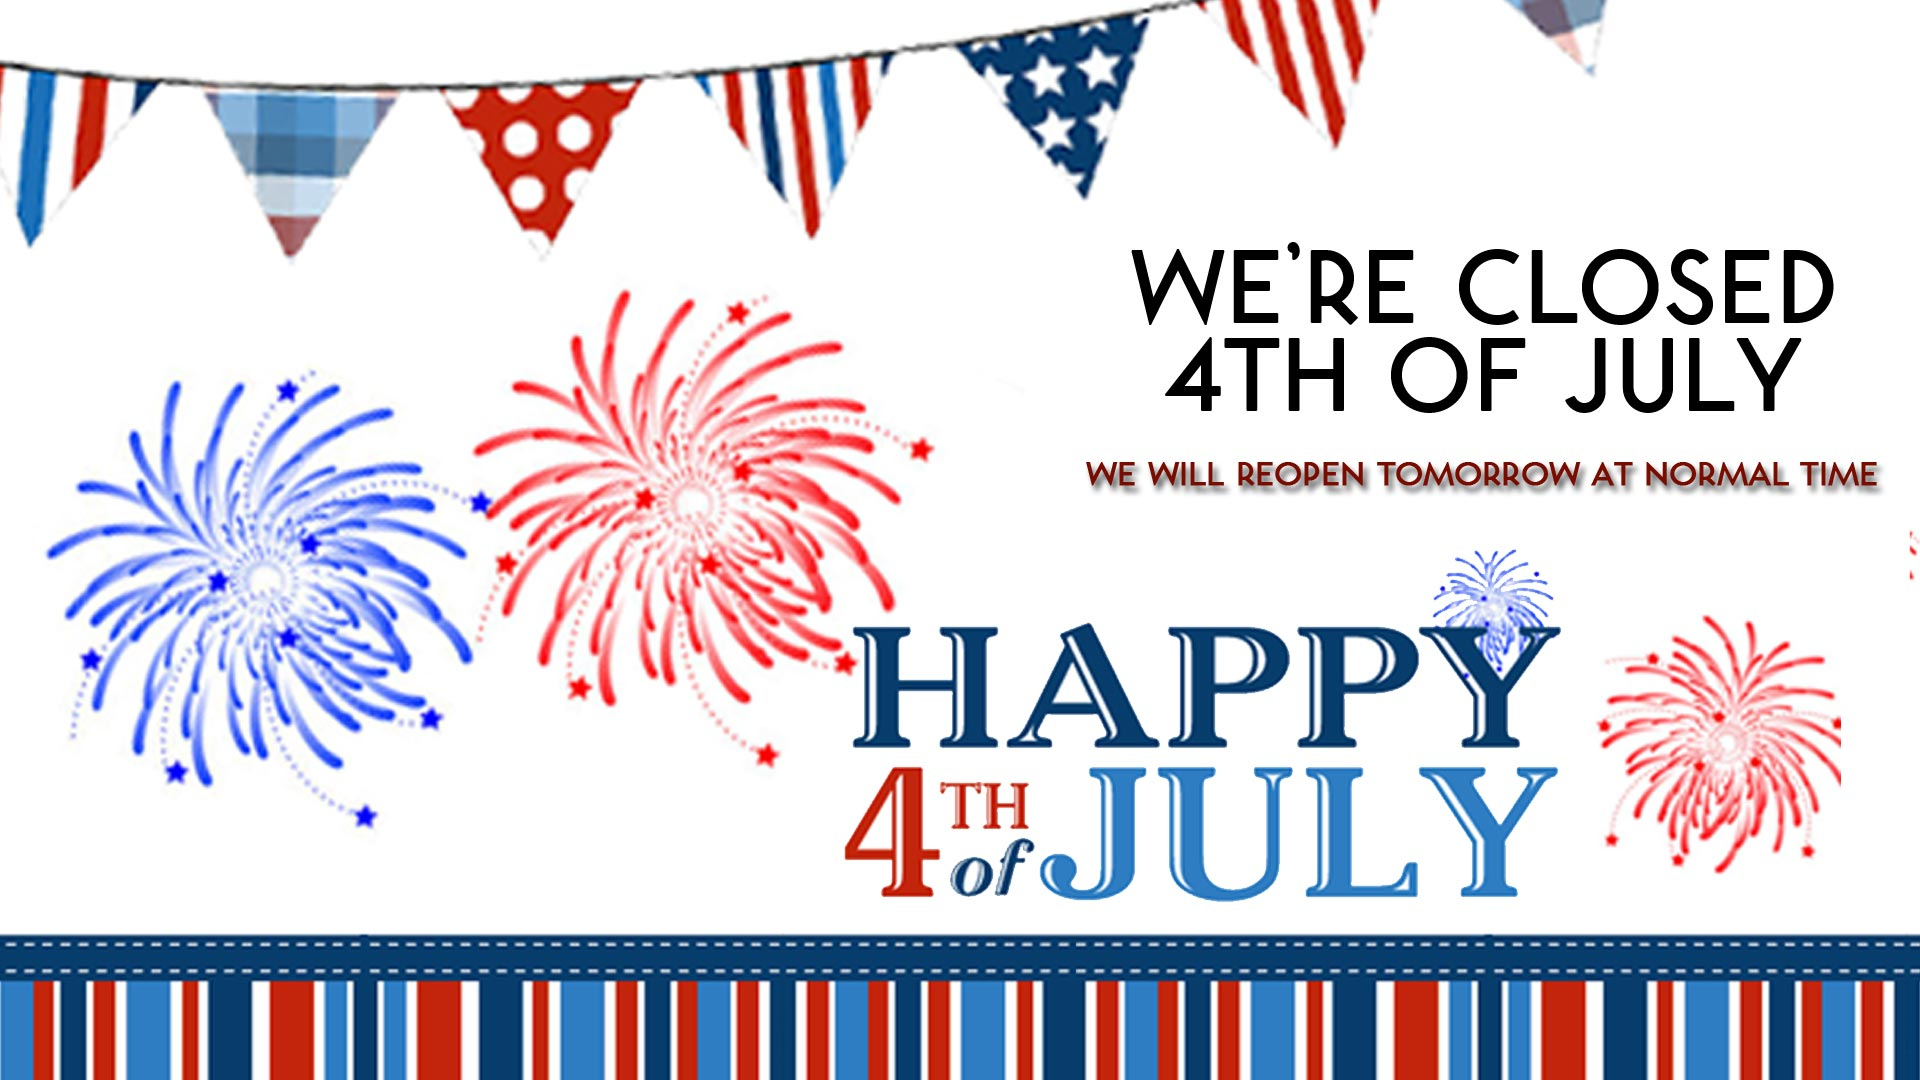 July 4Th Closed Sign Template | Example Calendar Printable 4th Of July Closed Sign Template